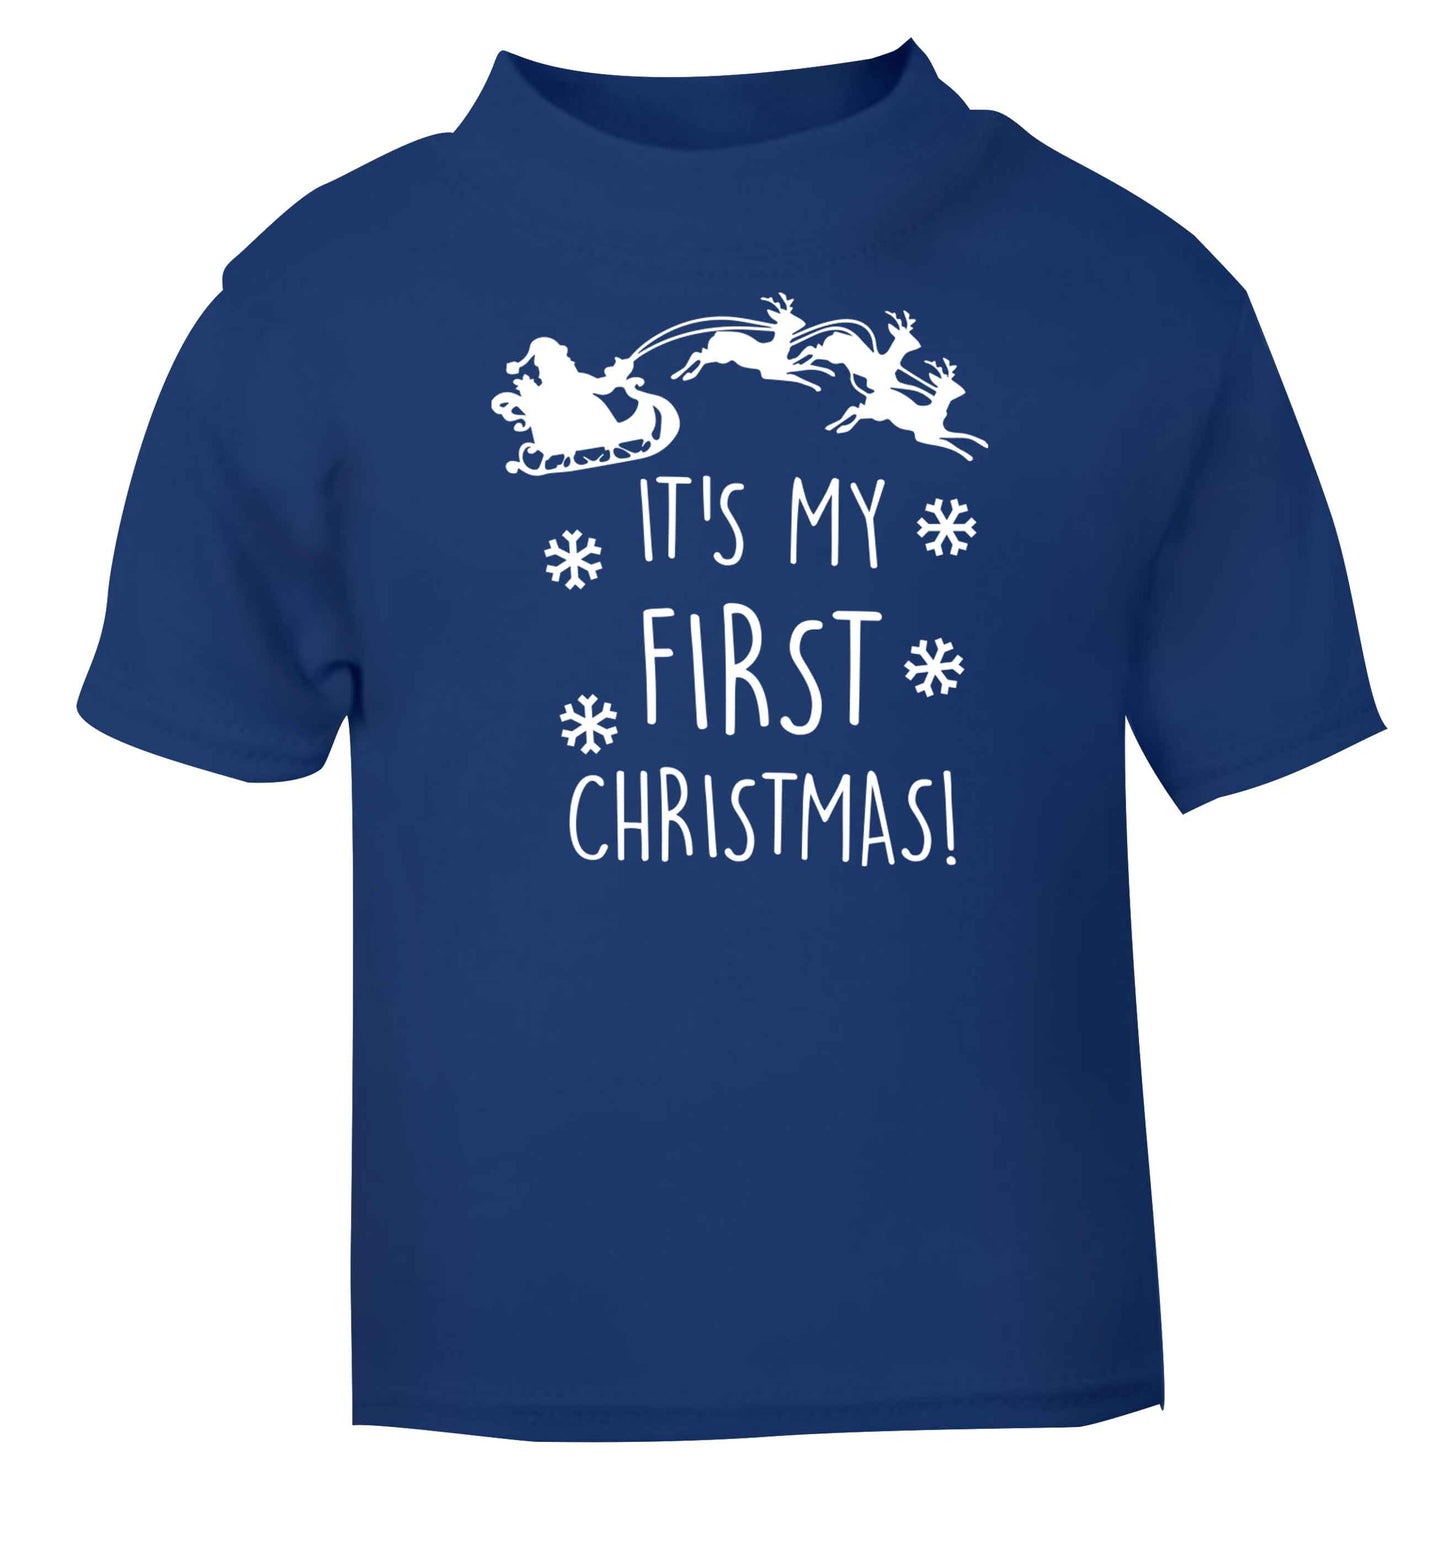 It's my first Christmas - Santa sleigh text blue baby toddler Tshirt 2 Years